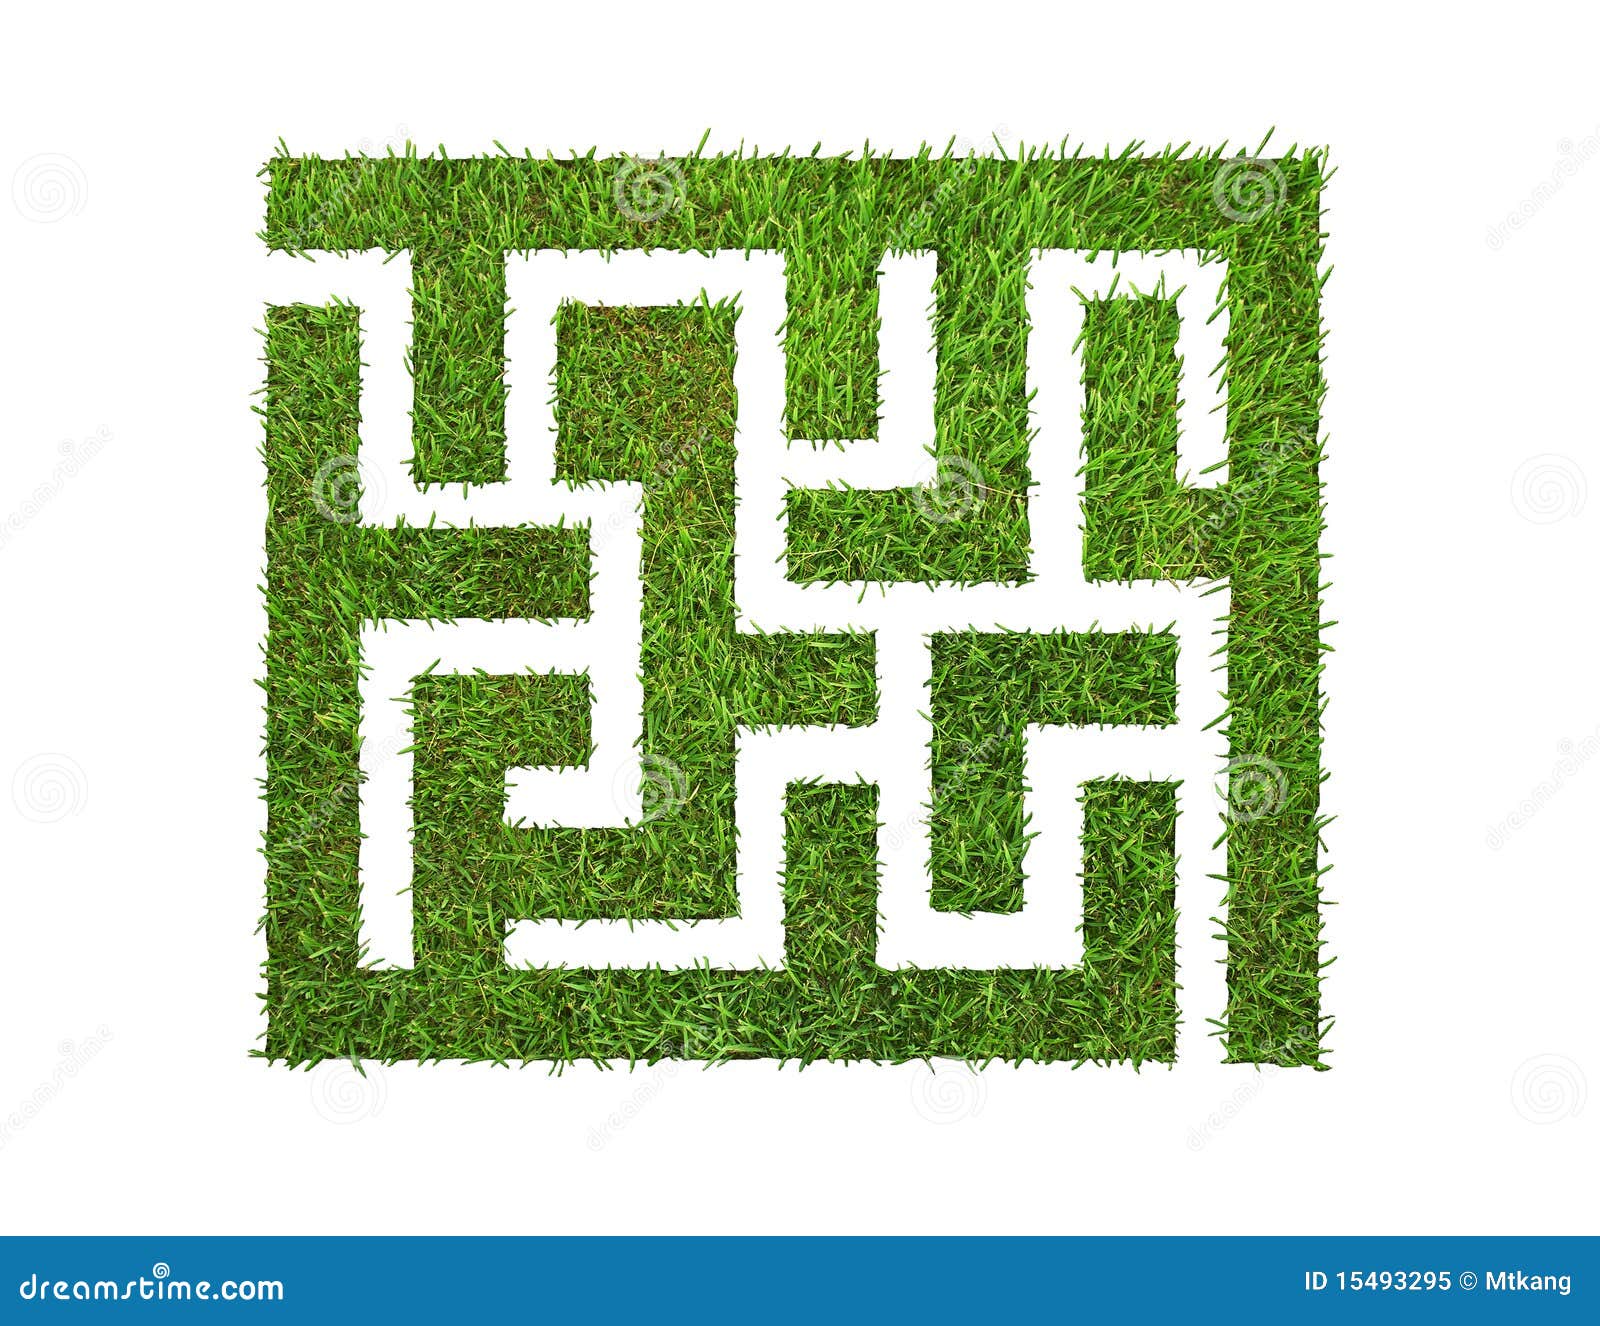 Green Grass Maze, Isolated On White Royalty Free Stock Photo - Image